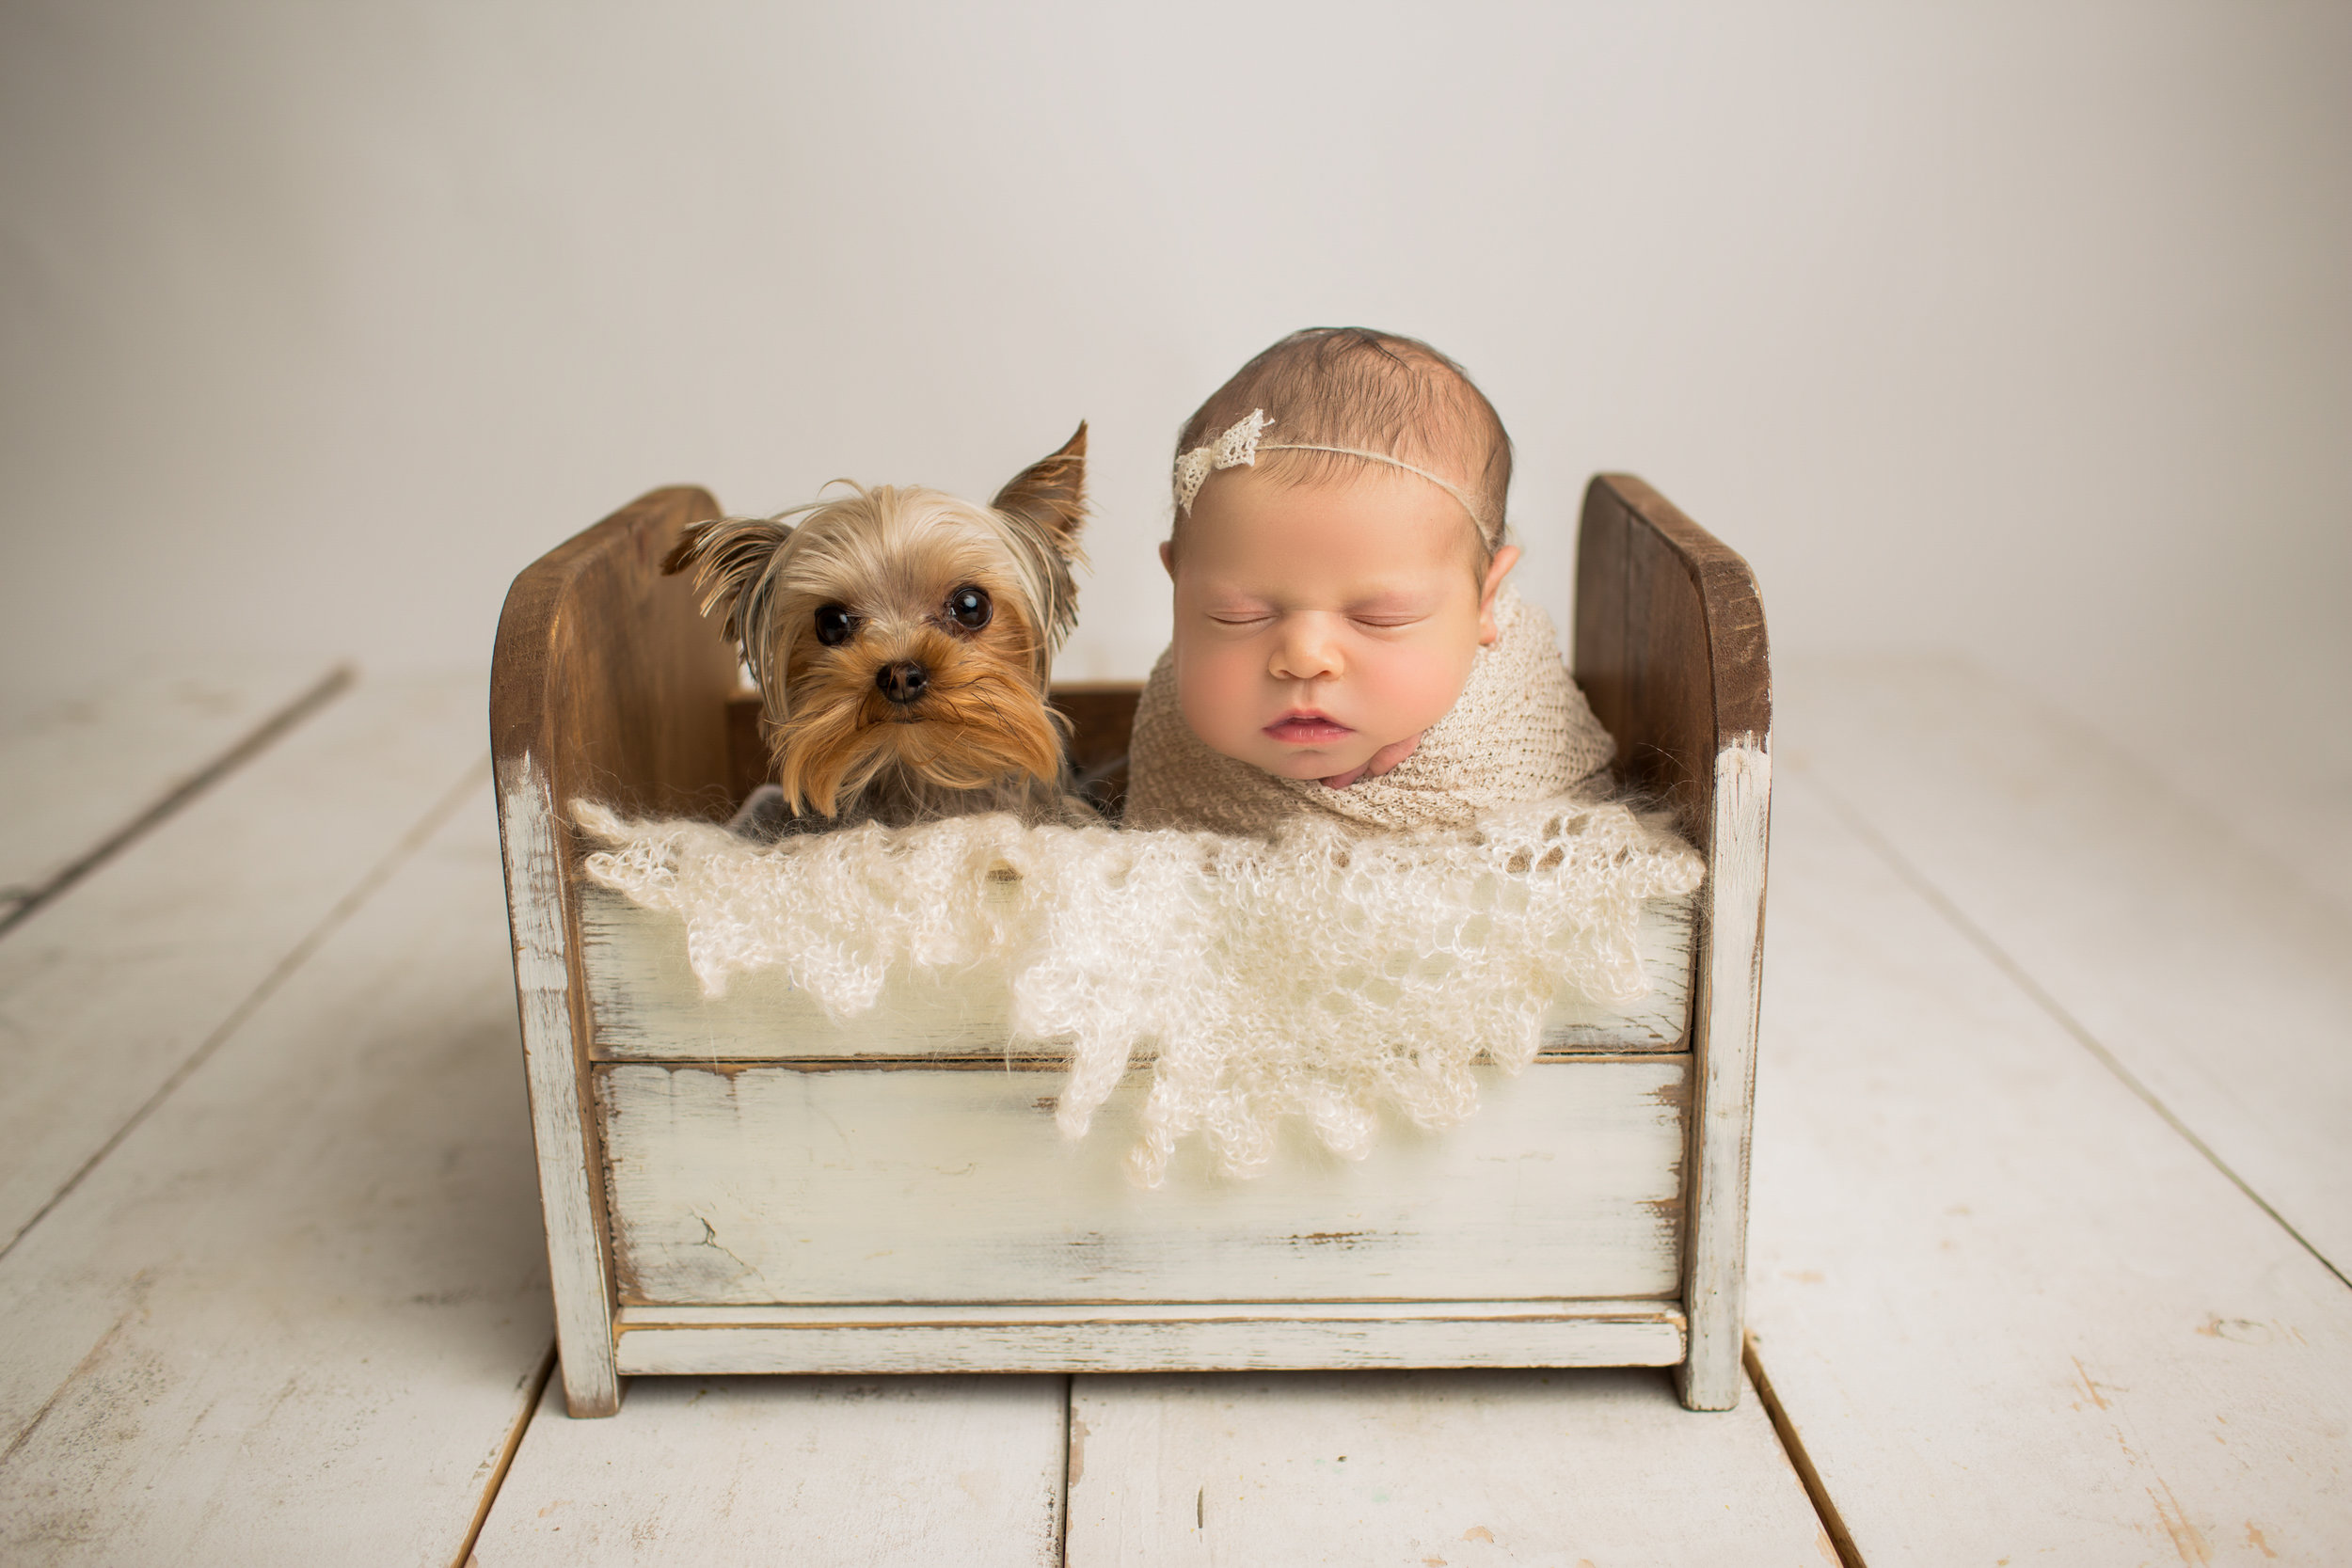 Baby snuggled next to yorkie puppy in a crib